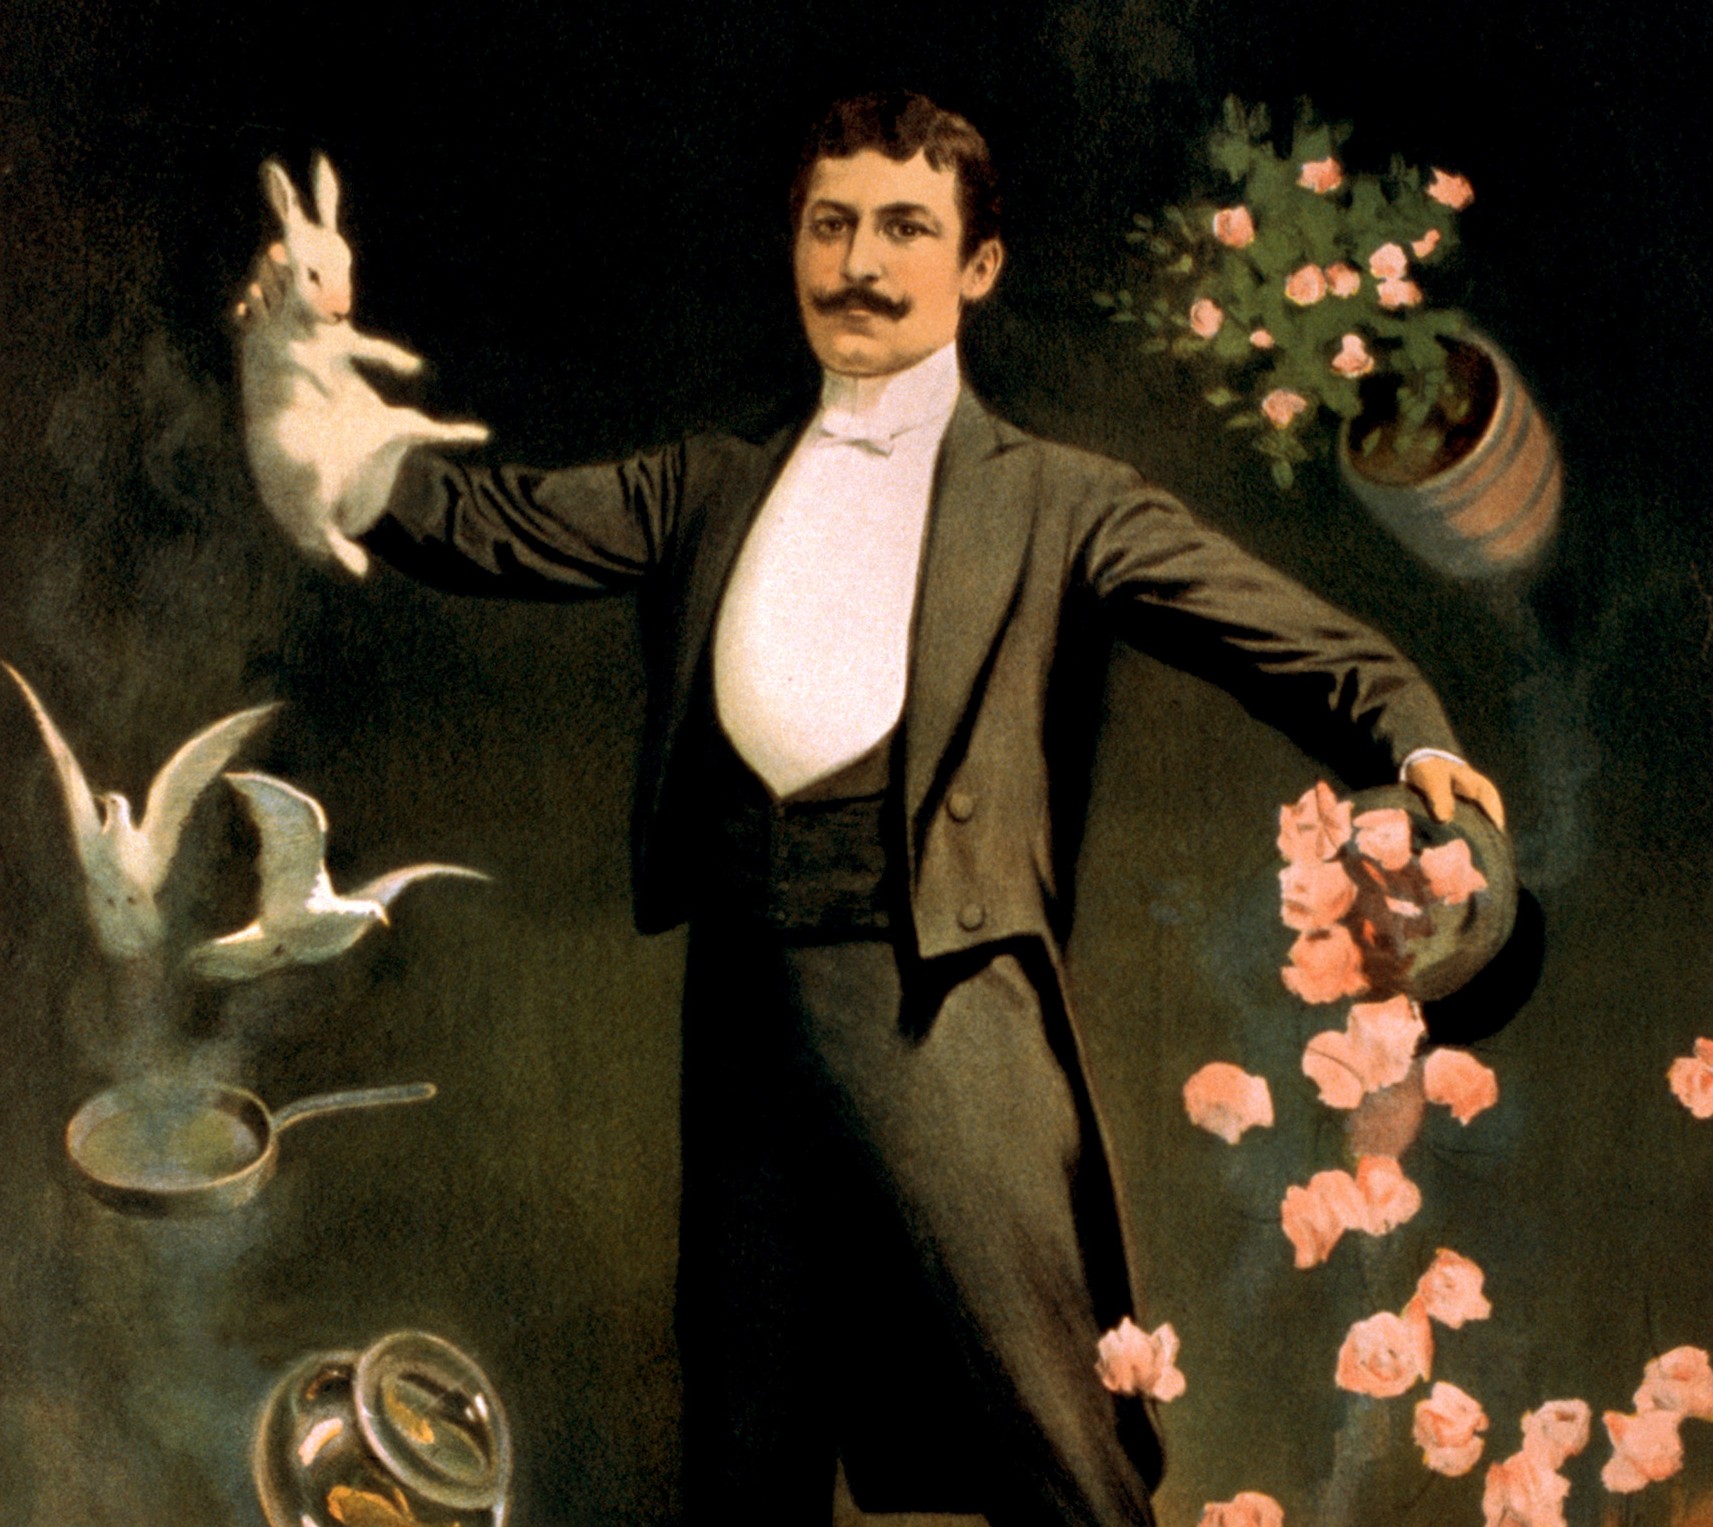 Zan_Zig_performing_with_rabbit_and_roses,_magician_poster,_1899